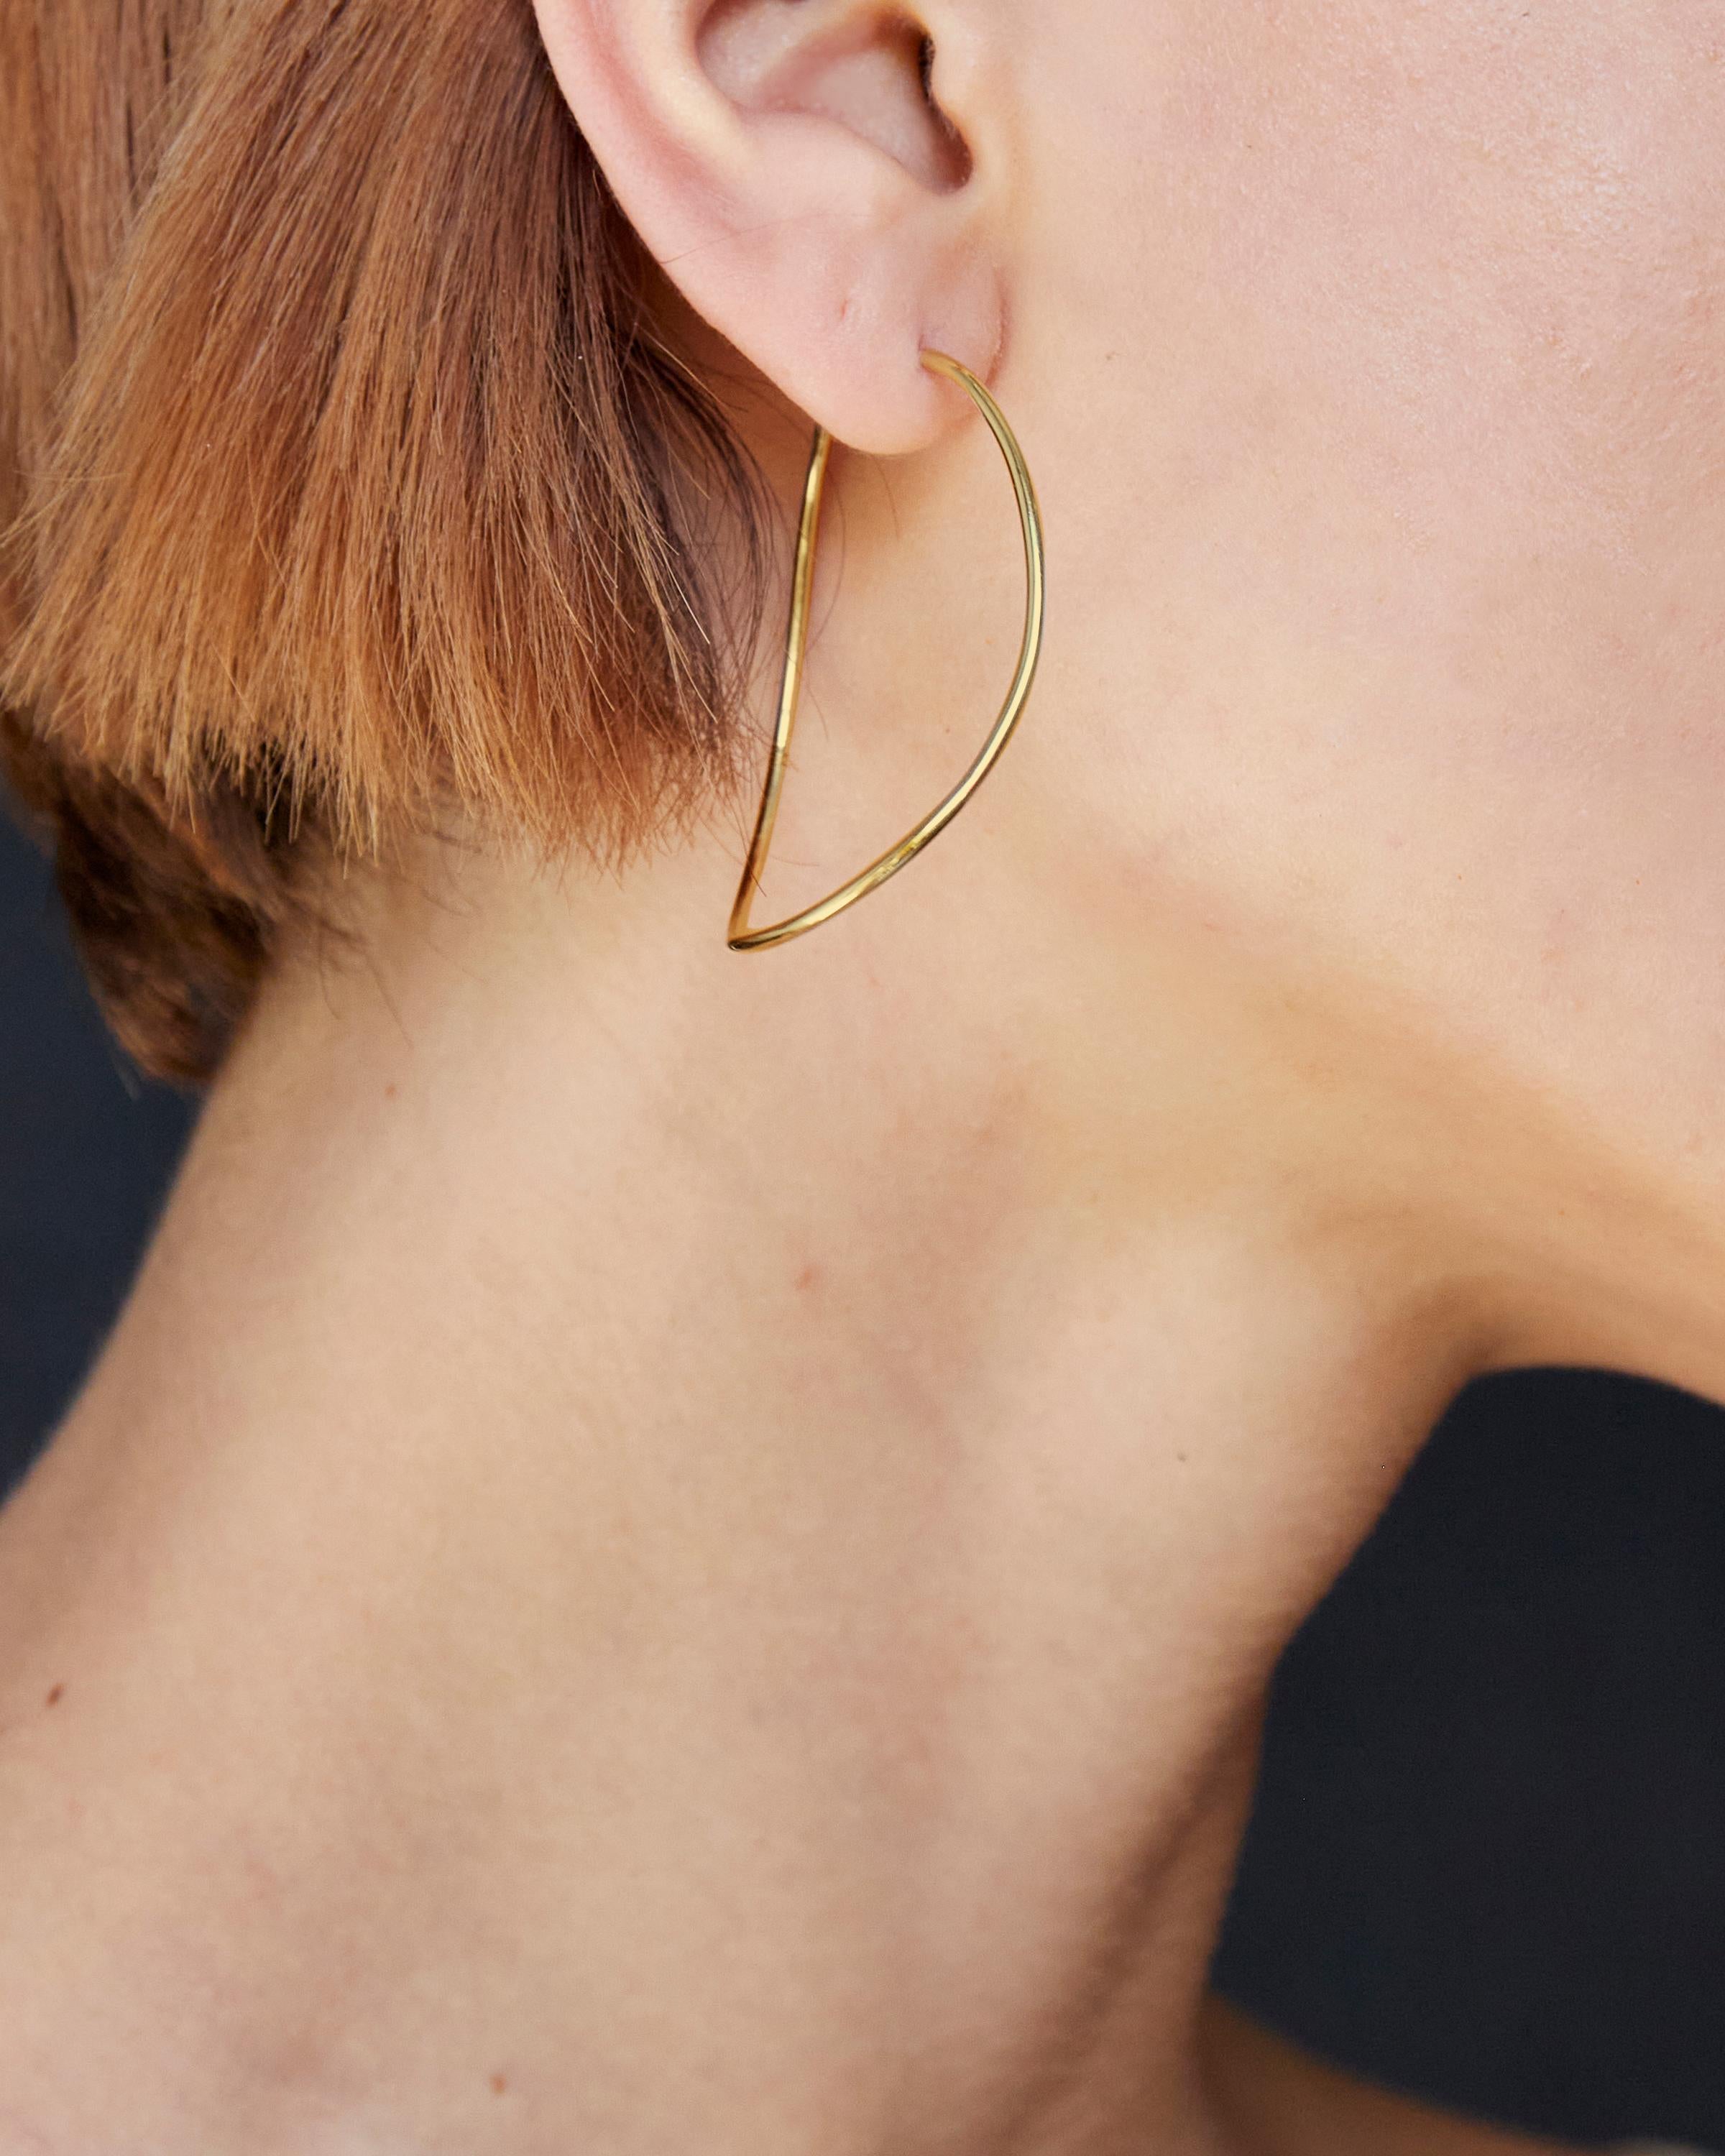 BAR Jewellery, London UK, CONTOUR EARRINGS, Gold Plated 

The gentle curves of the Contour hoops are inspired by the work of Modernist artists such as Terry Frost and Barbara Hepworth, who worked in the British town of St Ives in the 1950s. The soft